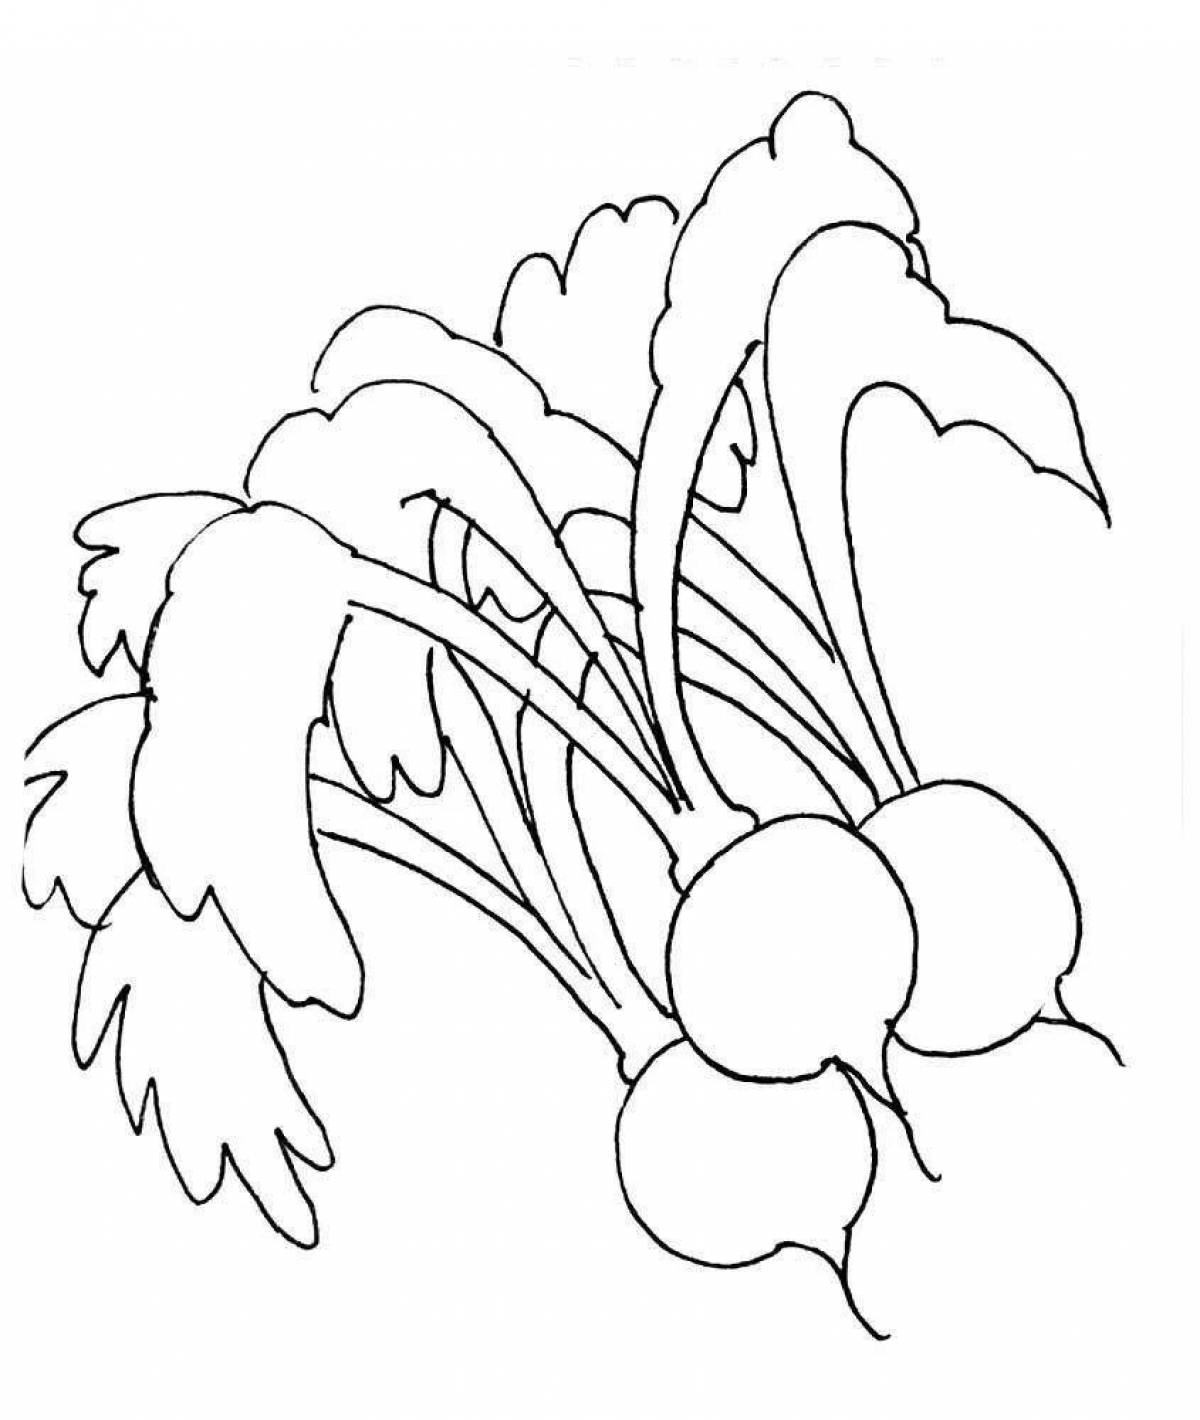 Colorful radish coloring page